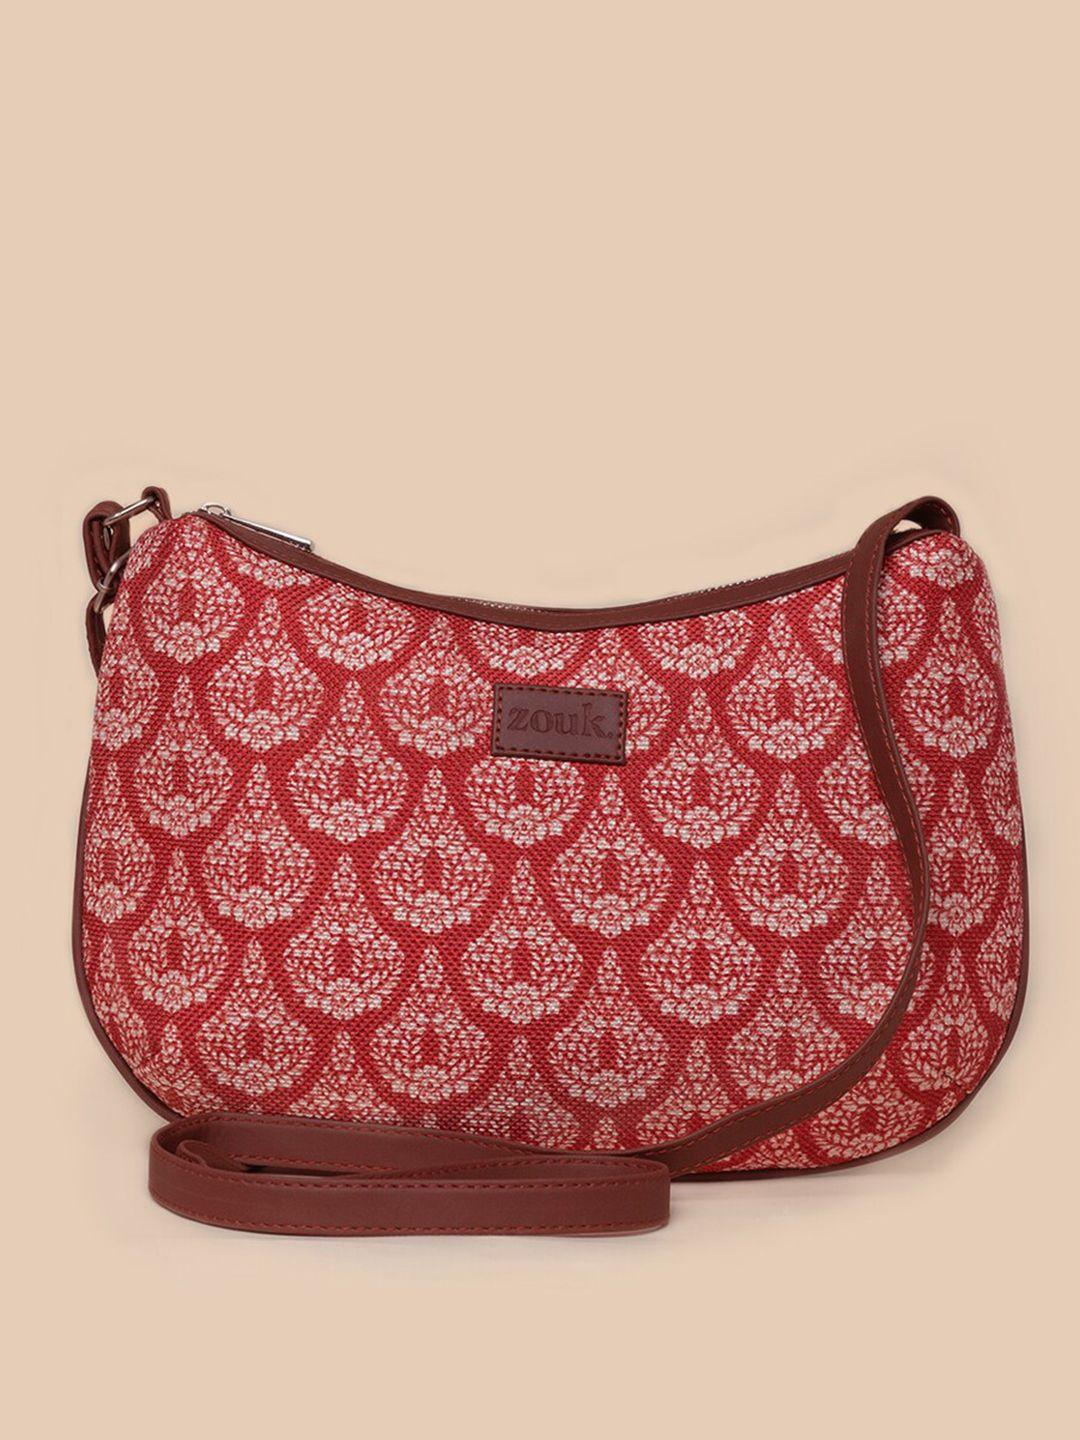 zouk red ethnic motifs printed structured sling bag